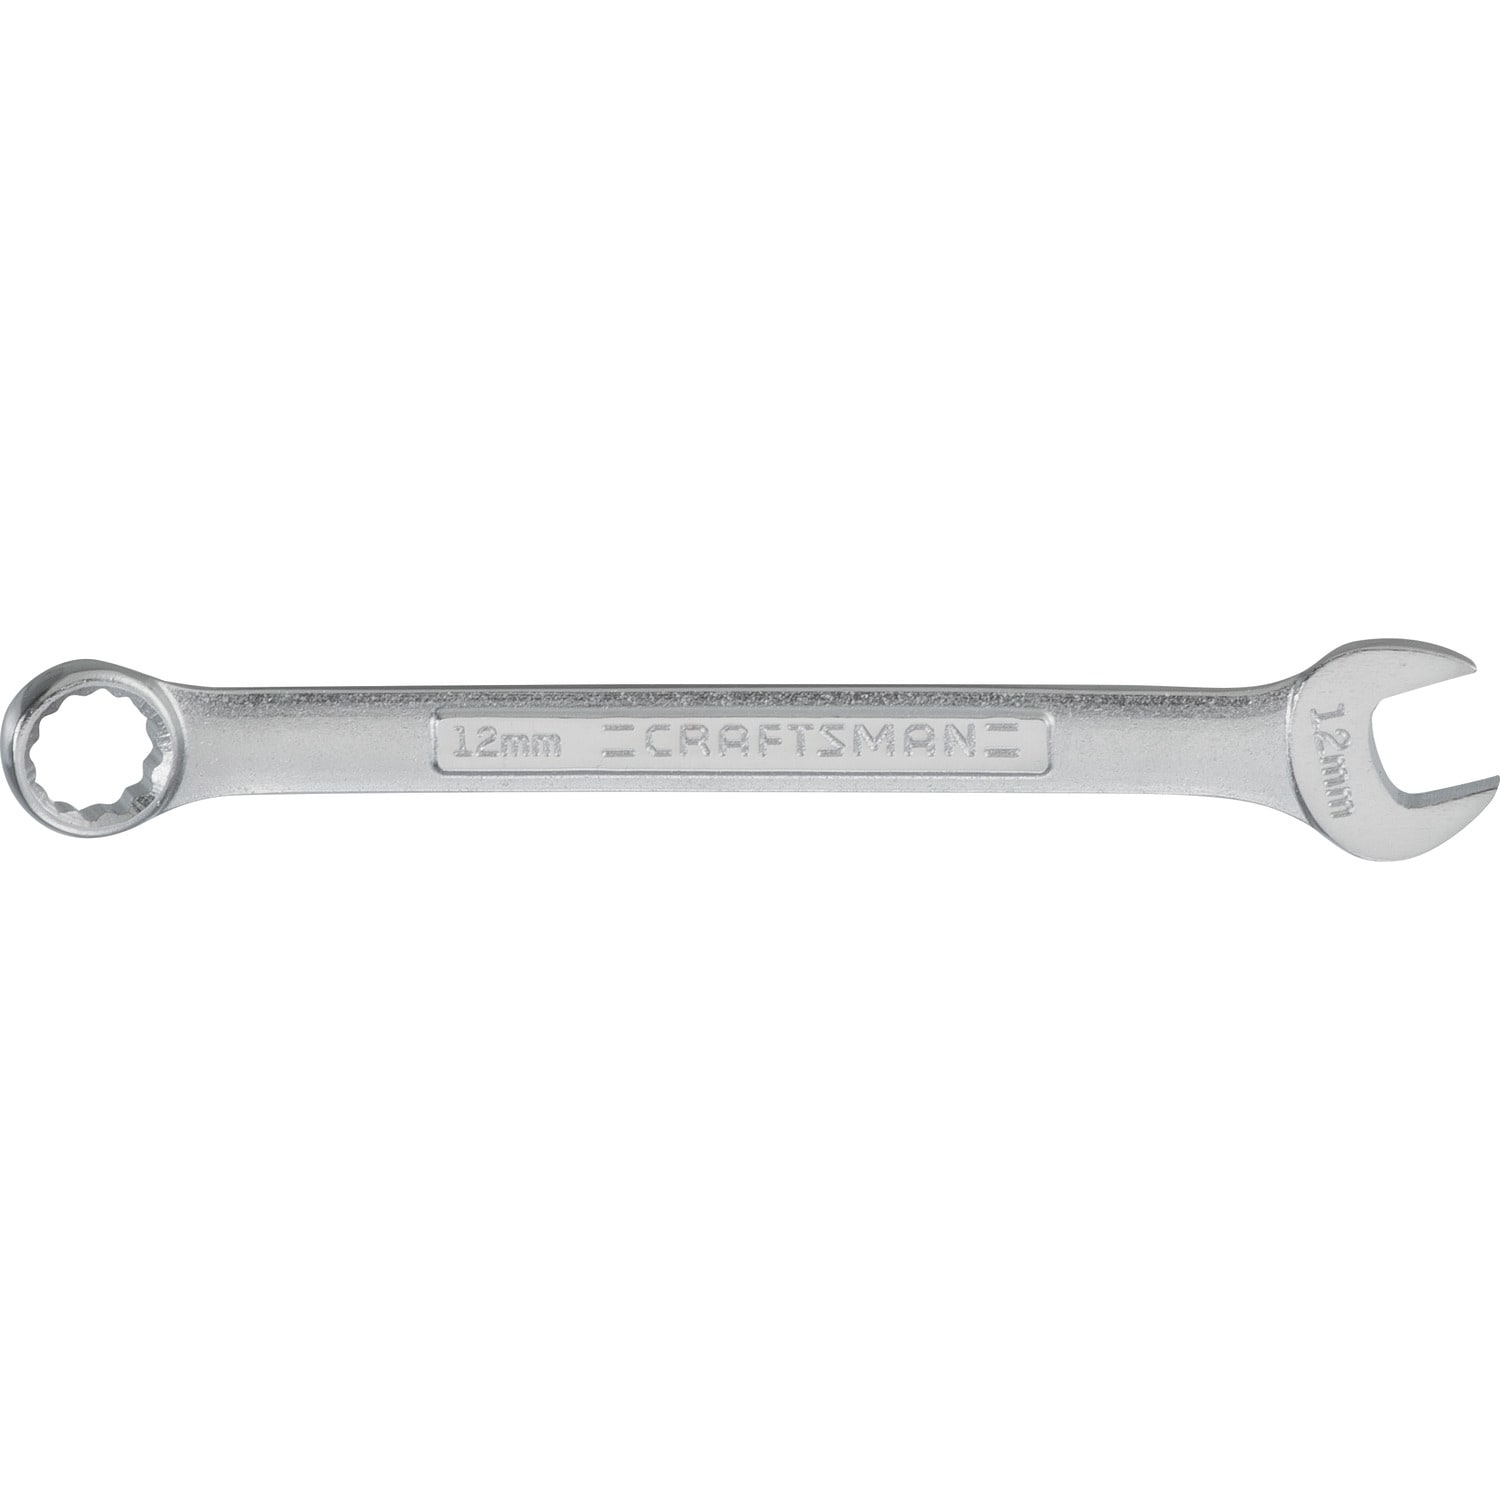 Wright Tool 12 Point Flat Stem Metric Combination Wrenches, 30 mm Opening,  404.83 mm - 1 EA (875-11-30MM) 